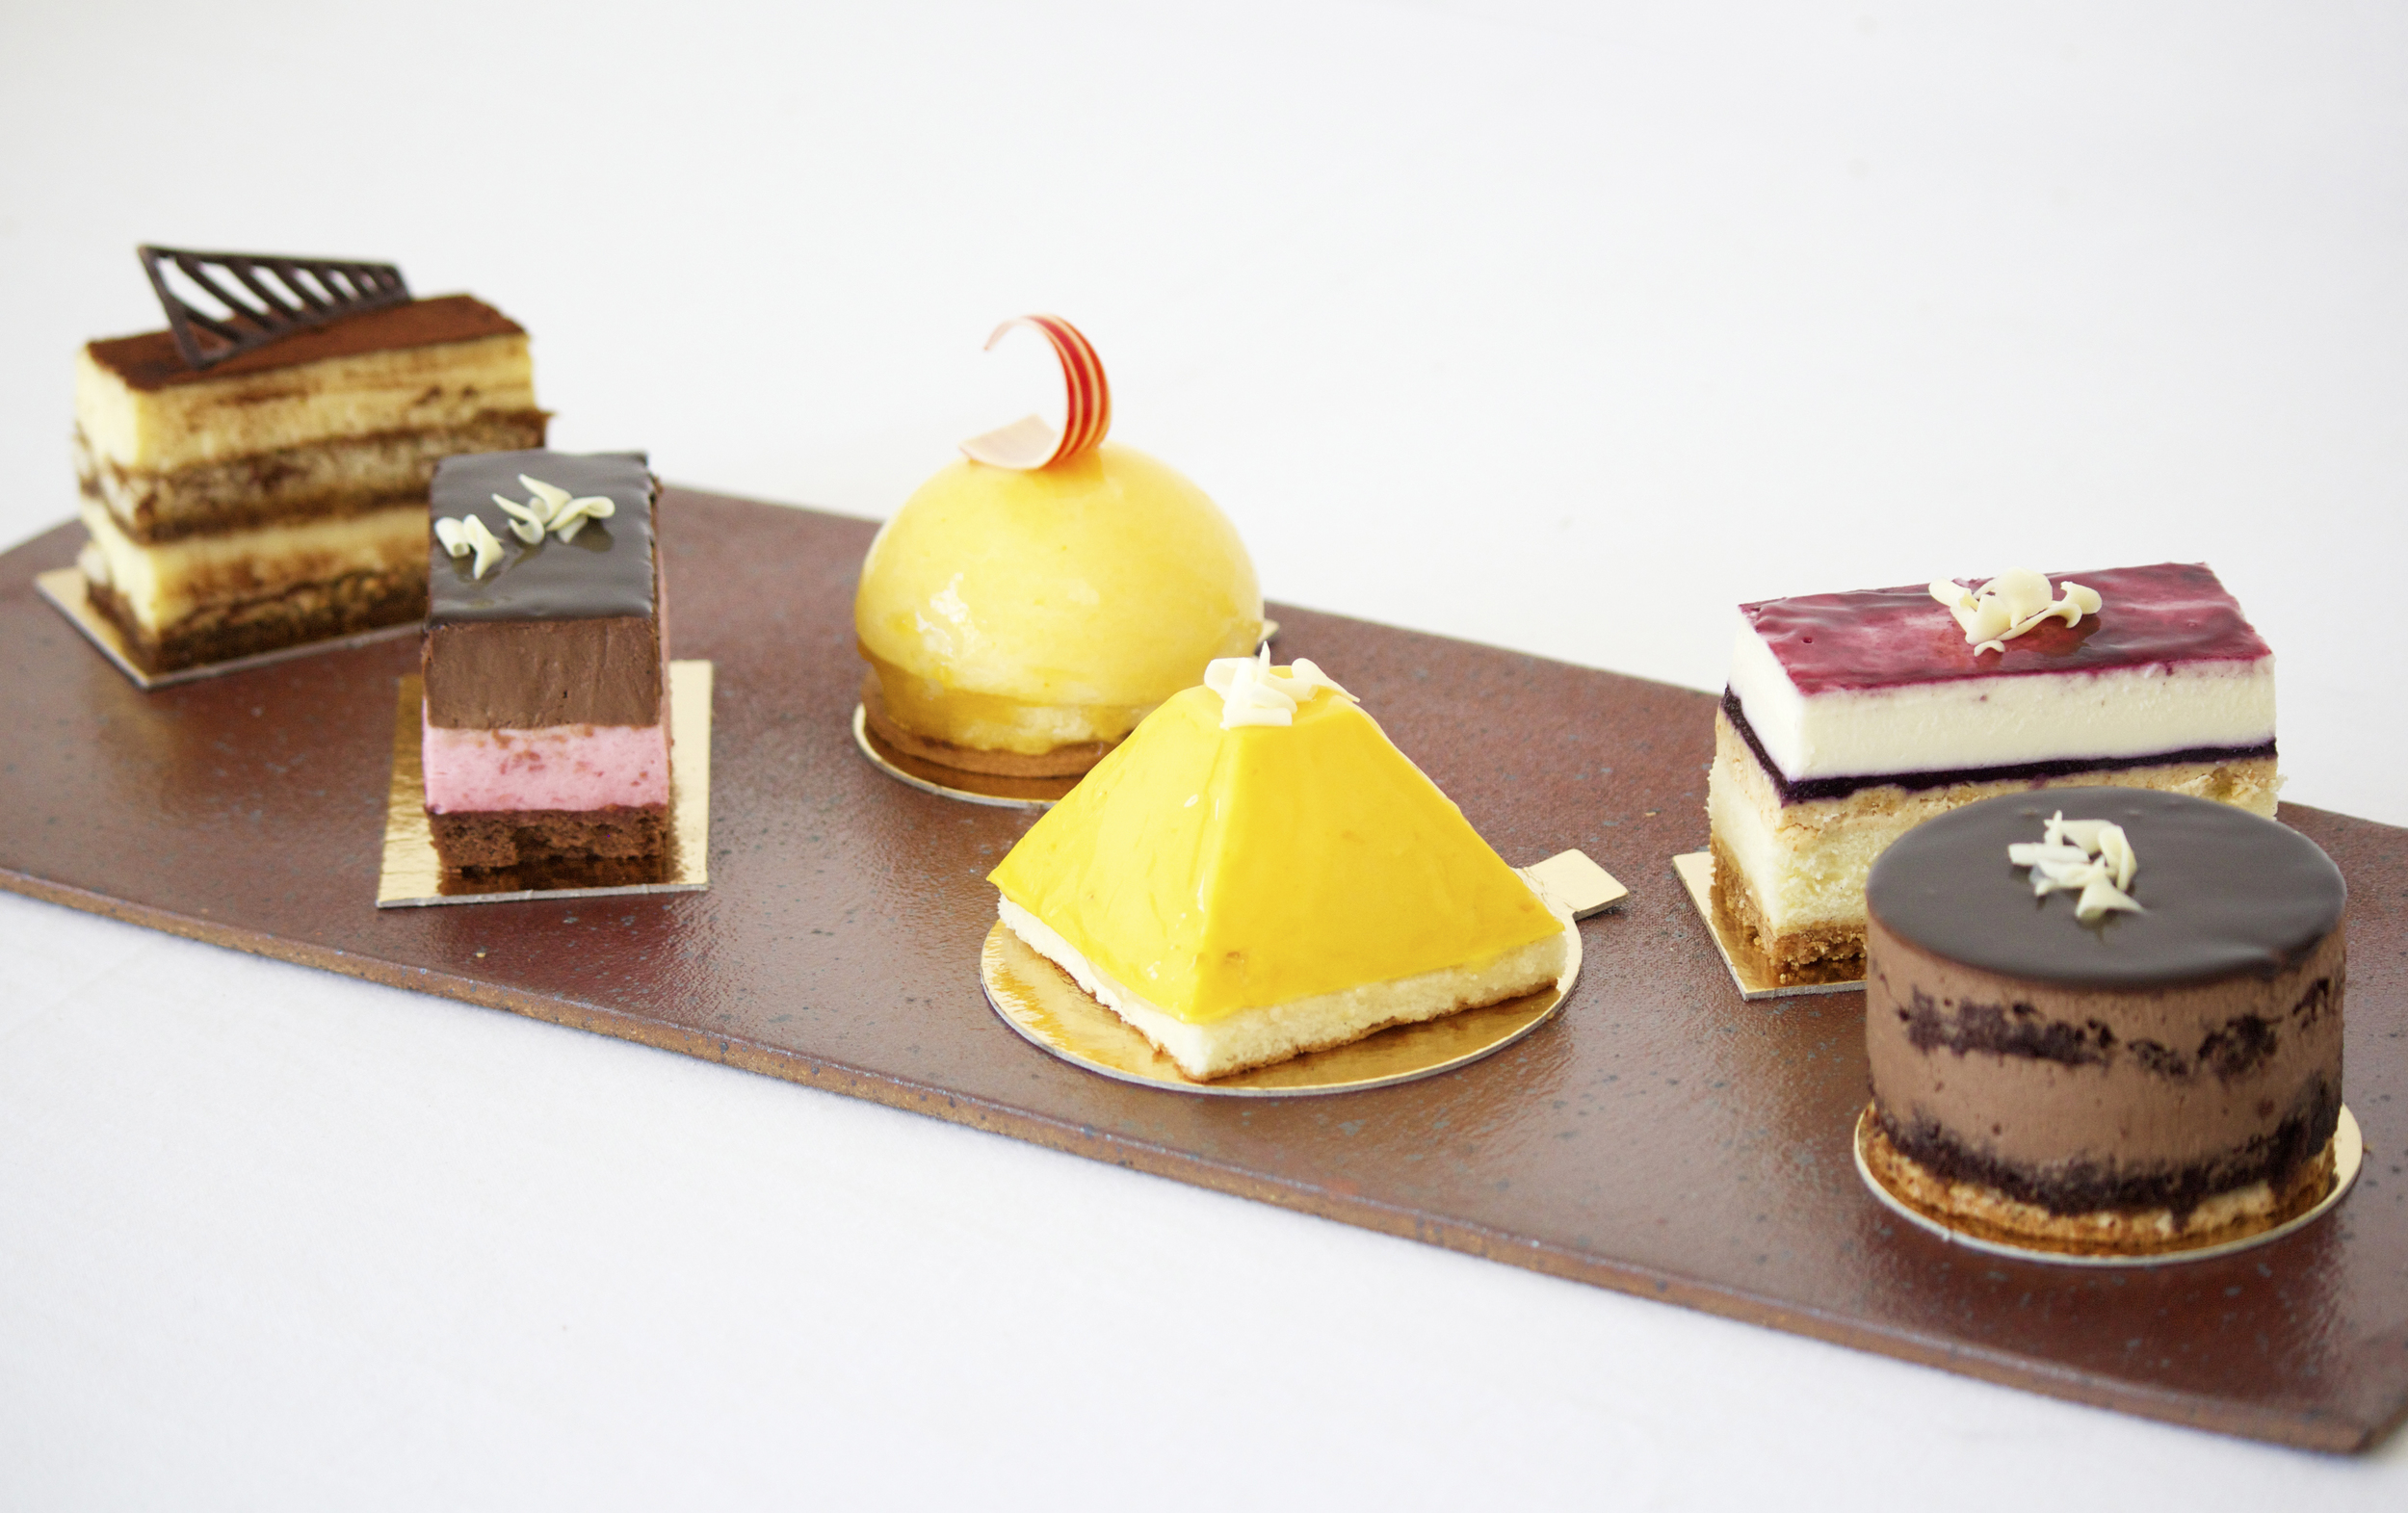 Pastry selection